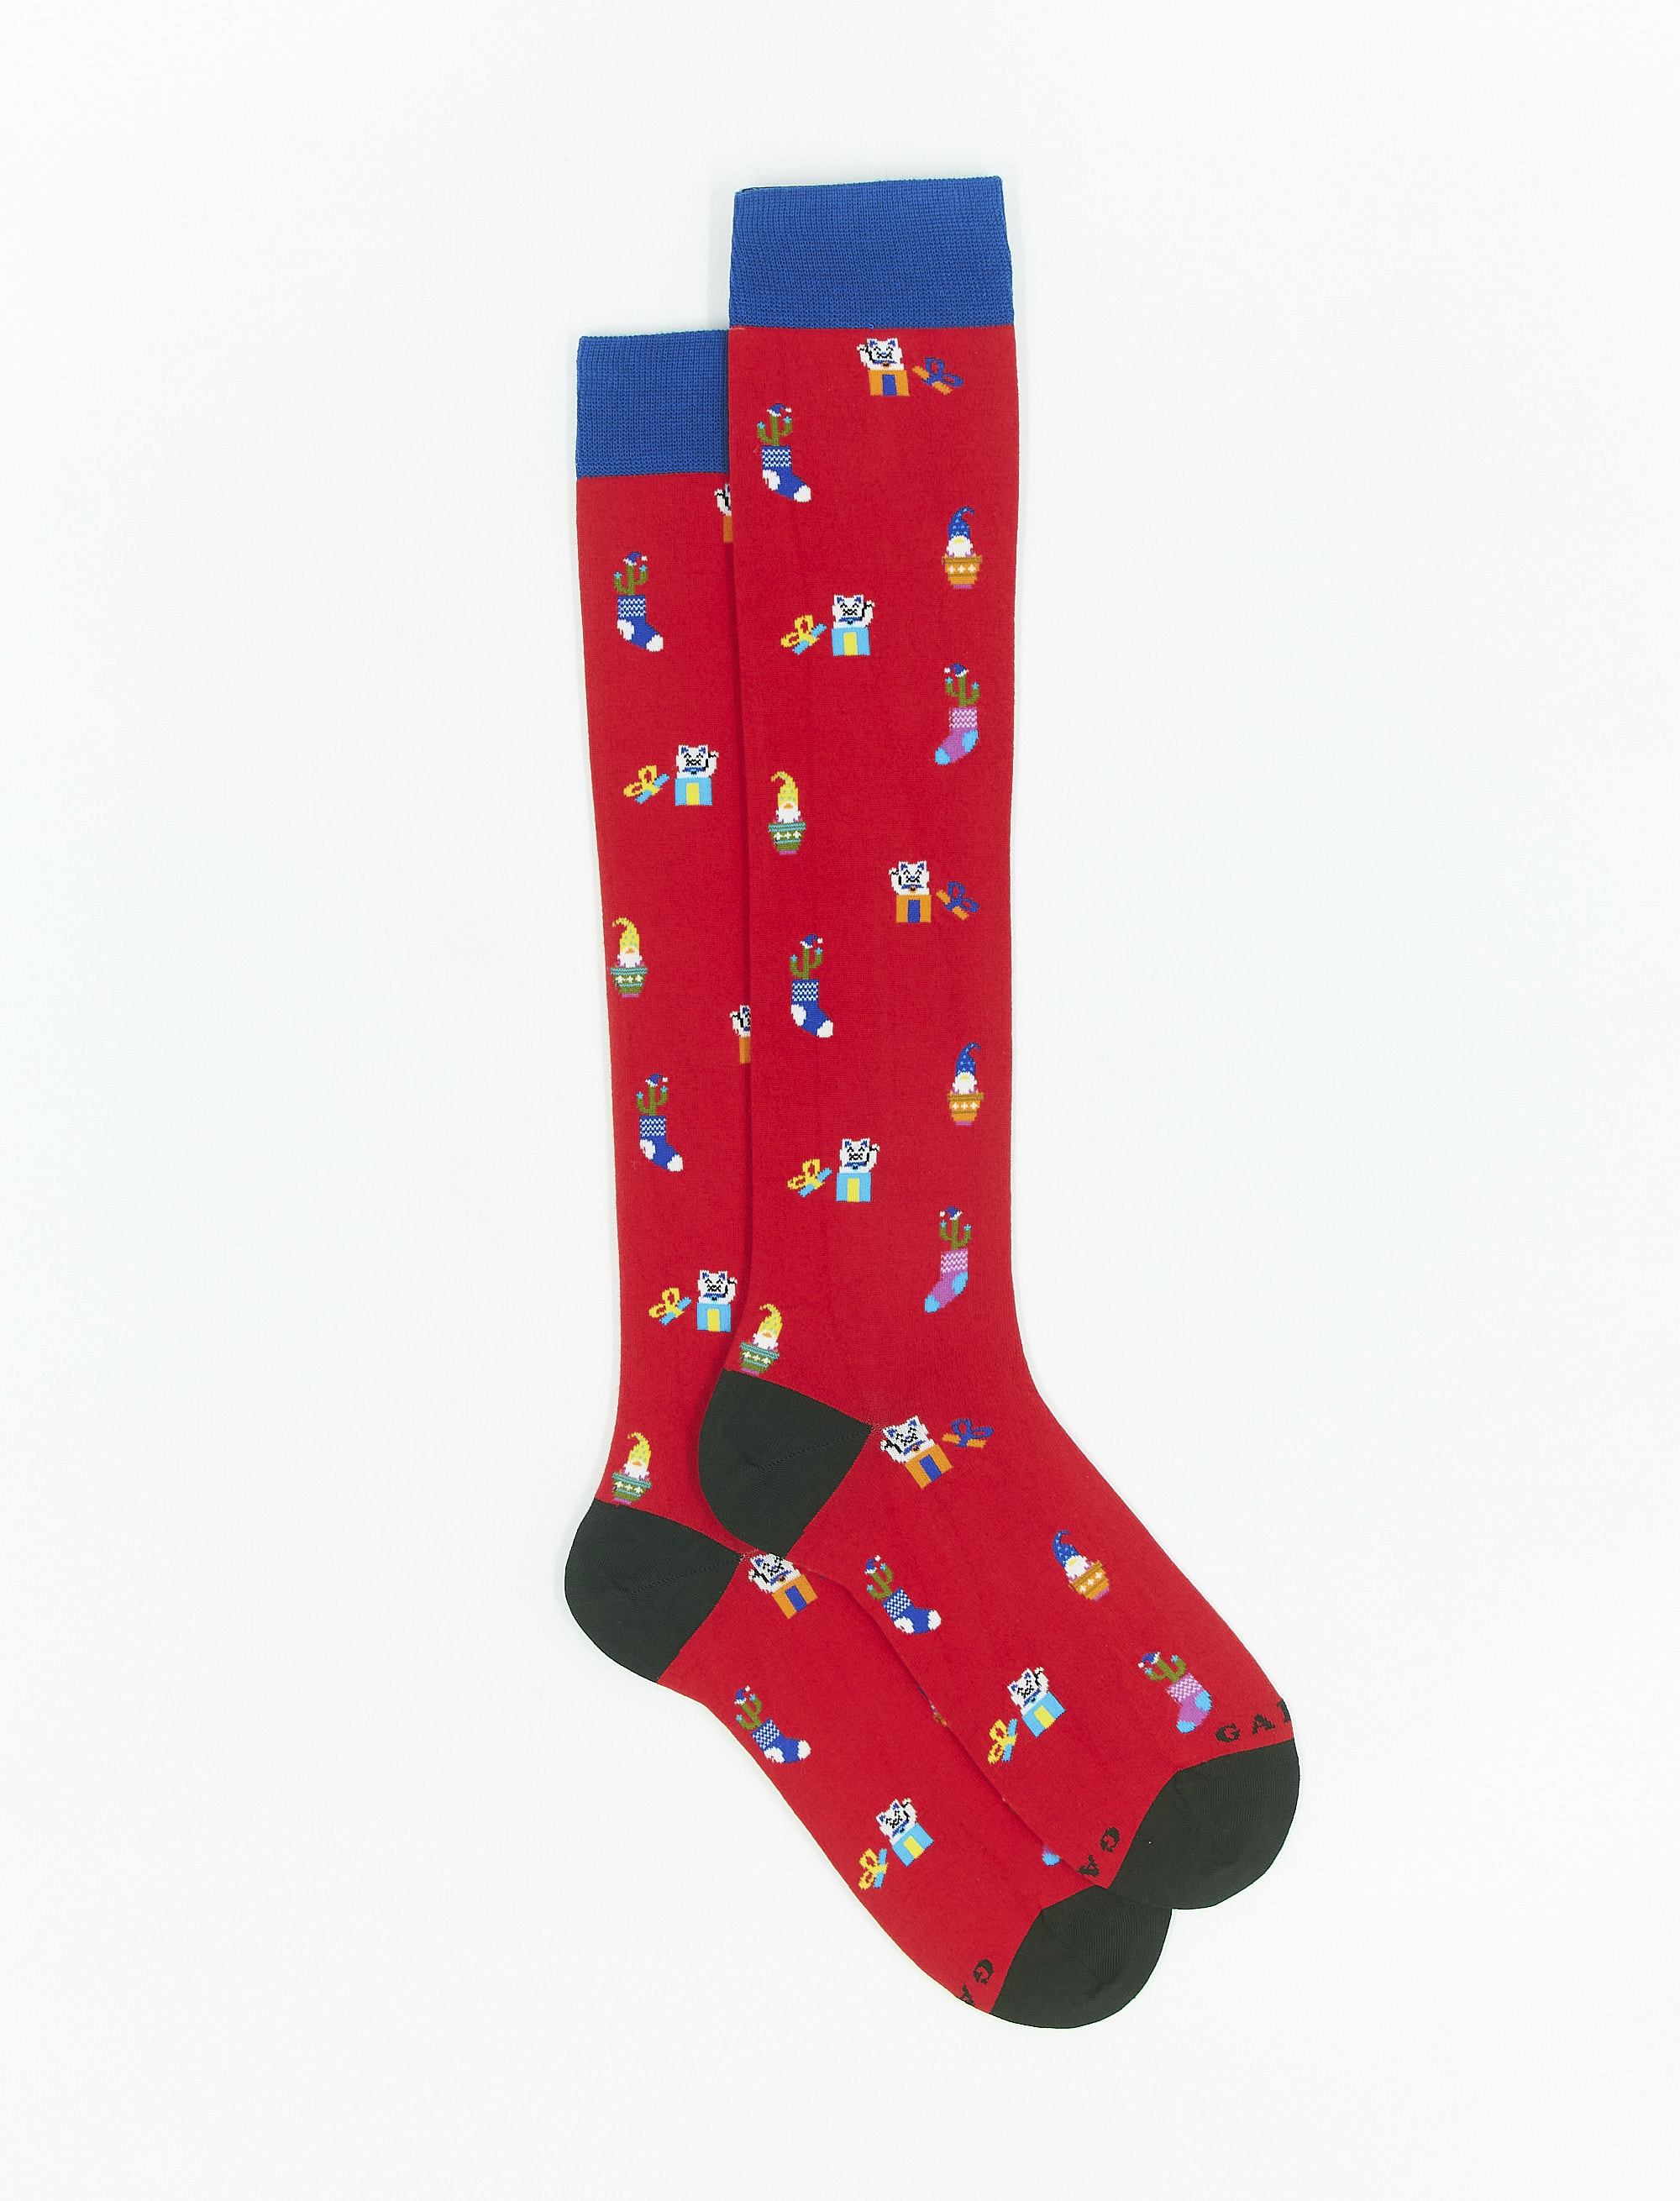 Women's long poppy red light cotton socks with Christmas motif | Gallo 1927 - Official Online Shop